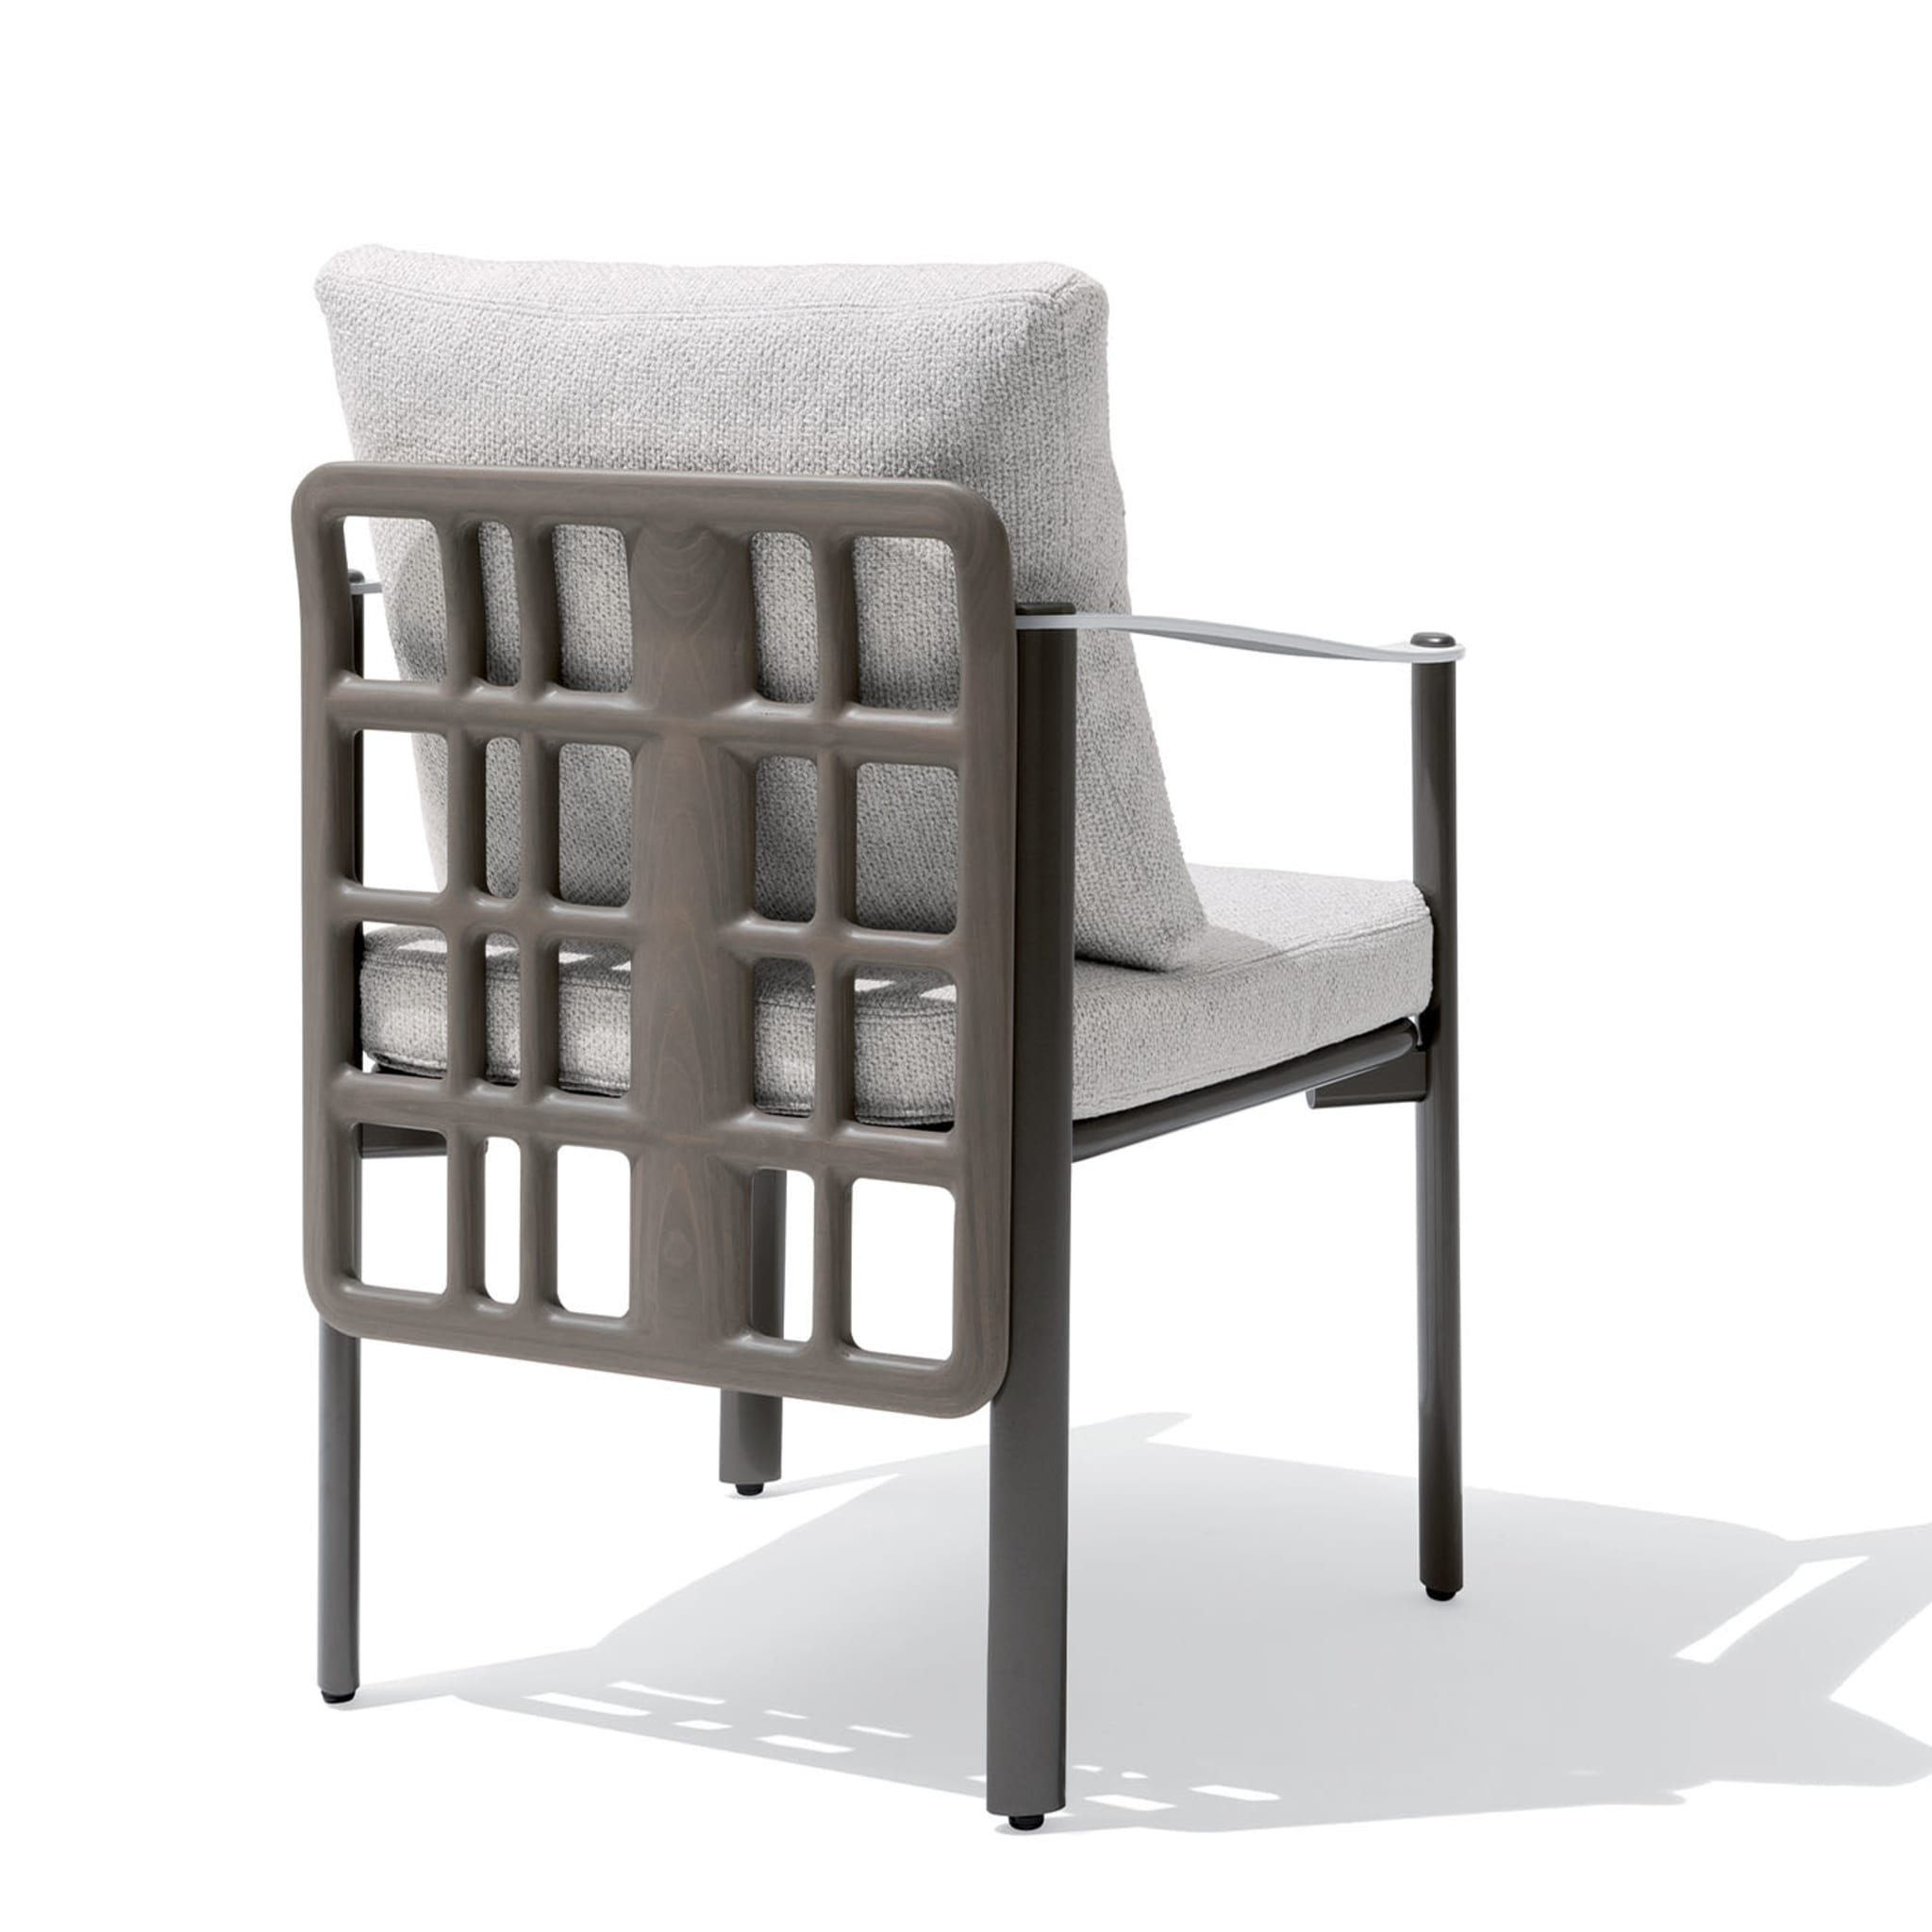 Aldìa Outdoor Chair by Carlo Colombo - Alternative view 3